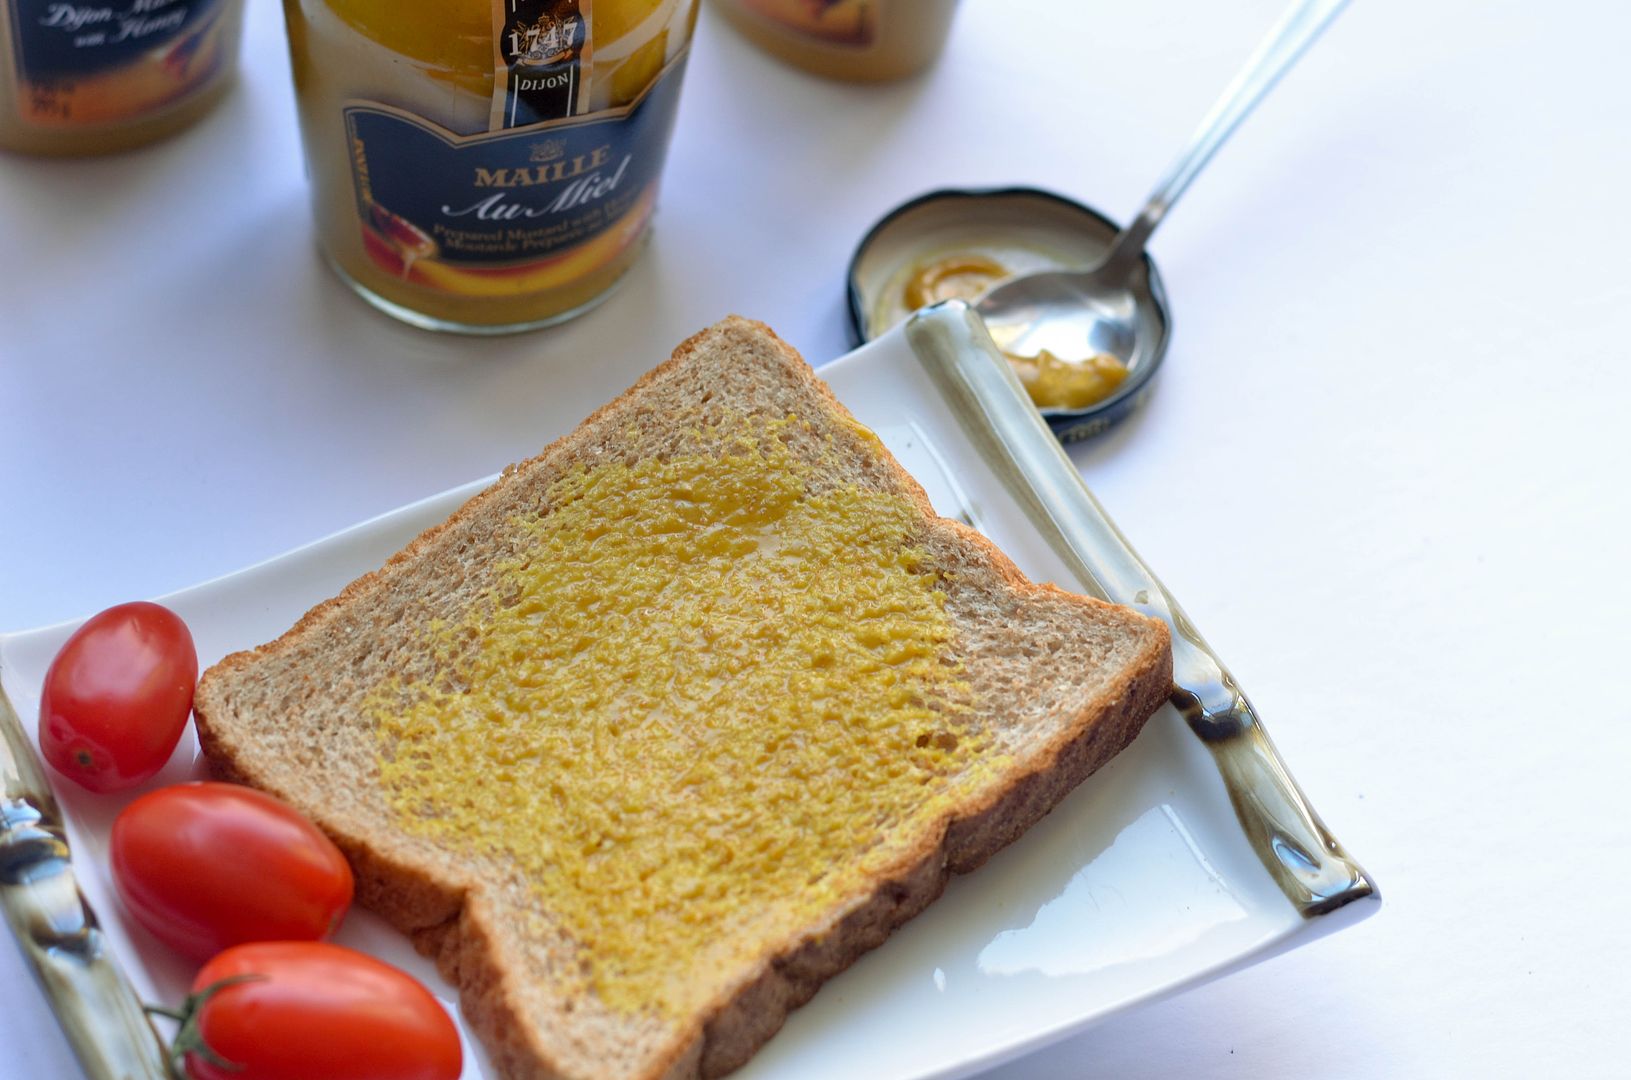 Want to sweeten up your life without adding a ton of calories? Check out five yummy ways to use Maille’s Honey Dijon Mustard!